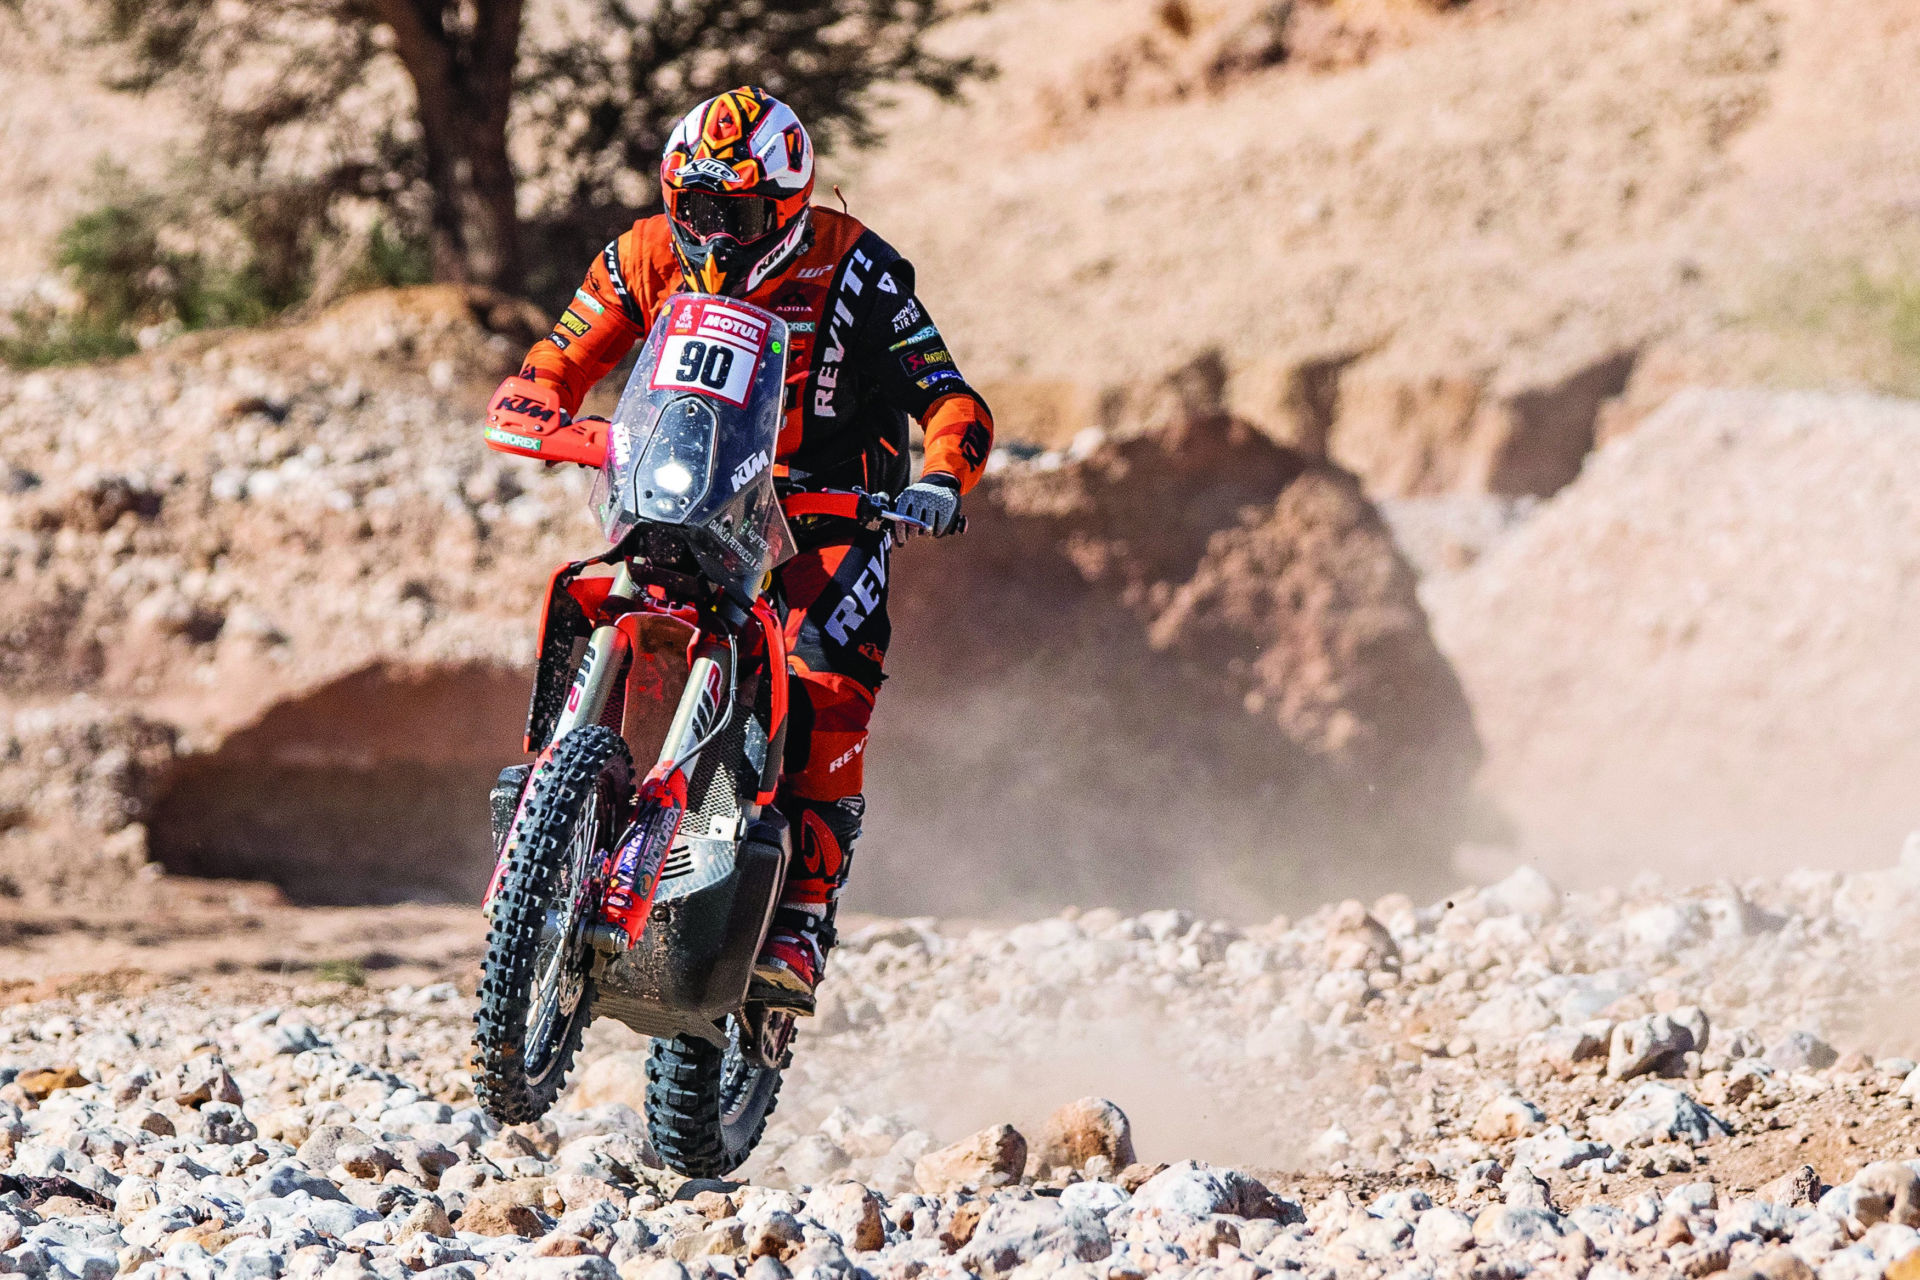 Danilo Petrucci (90) in action during Stage Five at the Dakar Rally. Photo by Rally Zone, courtesy KTM Factory Racing.